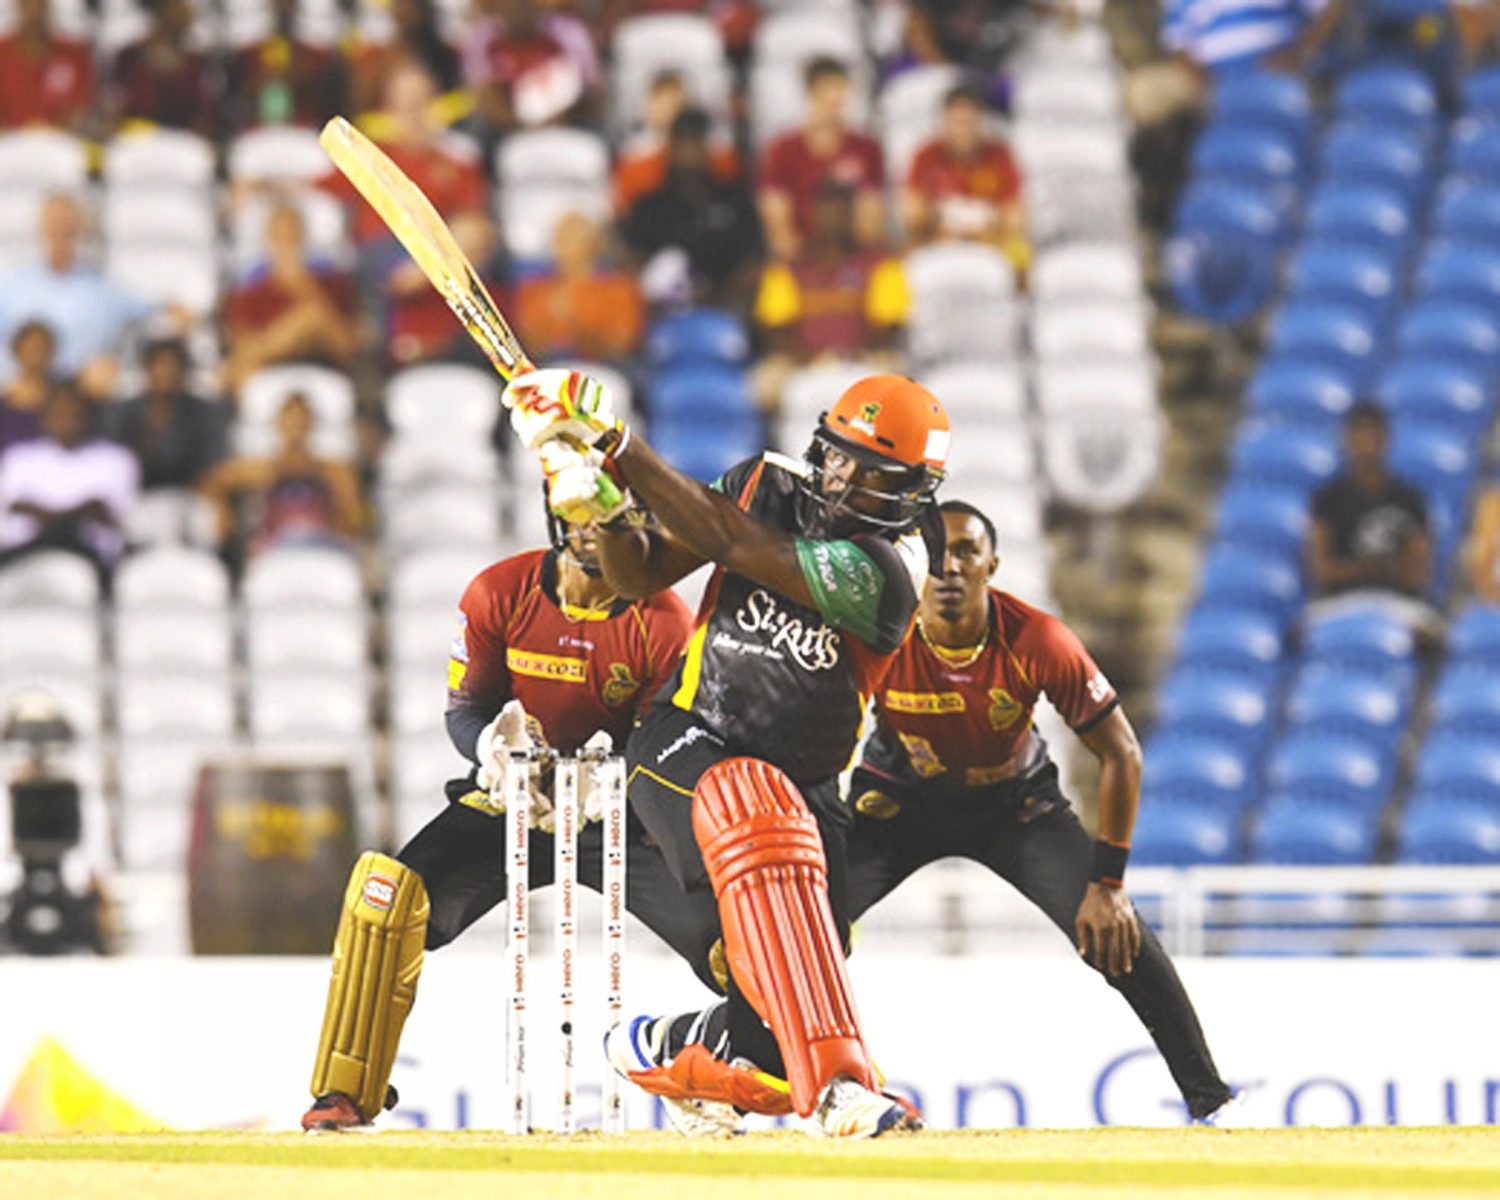 Chris Gayle held the St Kitts and Nevis Patriots innings together with an unbeaten knock of 54. A bove he hits a 6 during the Play Off Match of the 2017 Hero Caribbean Premier League between St Kitts & Nevis Patriots and Trinbago Knight Riders at Brian Lara Cricket Academy in Tarouba, Trinidad last night. (Photo by Randy Brooks – CPL T20 via Getty Images)